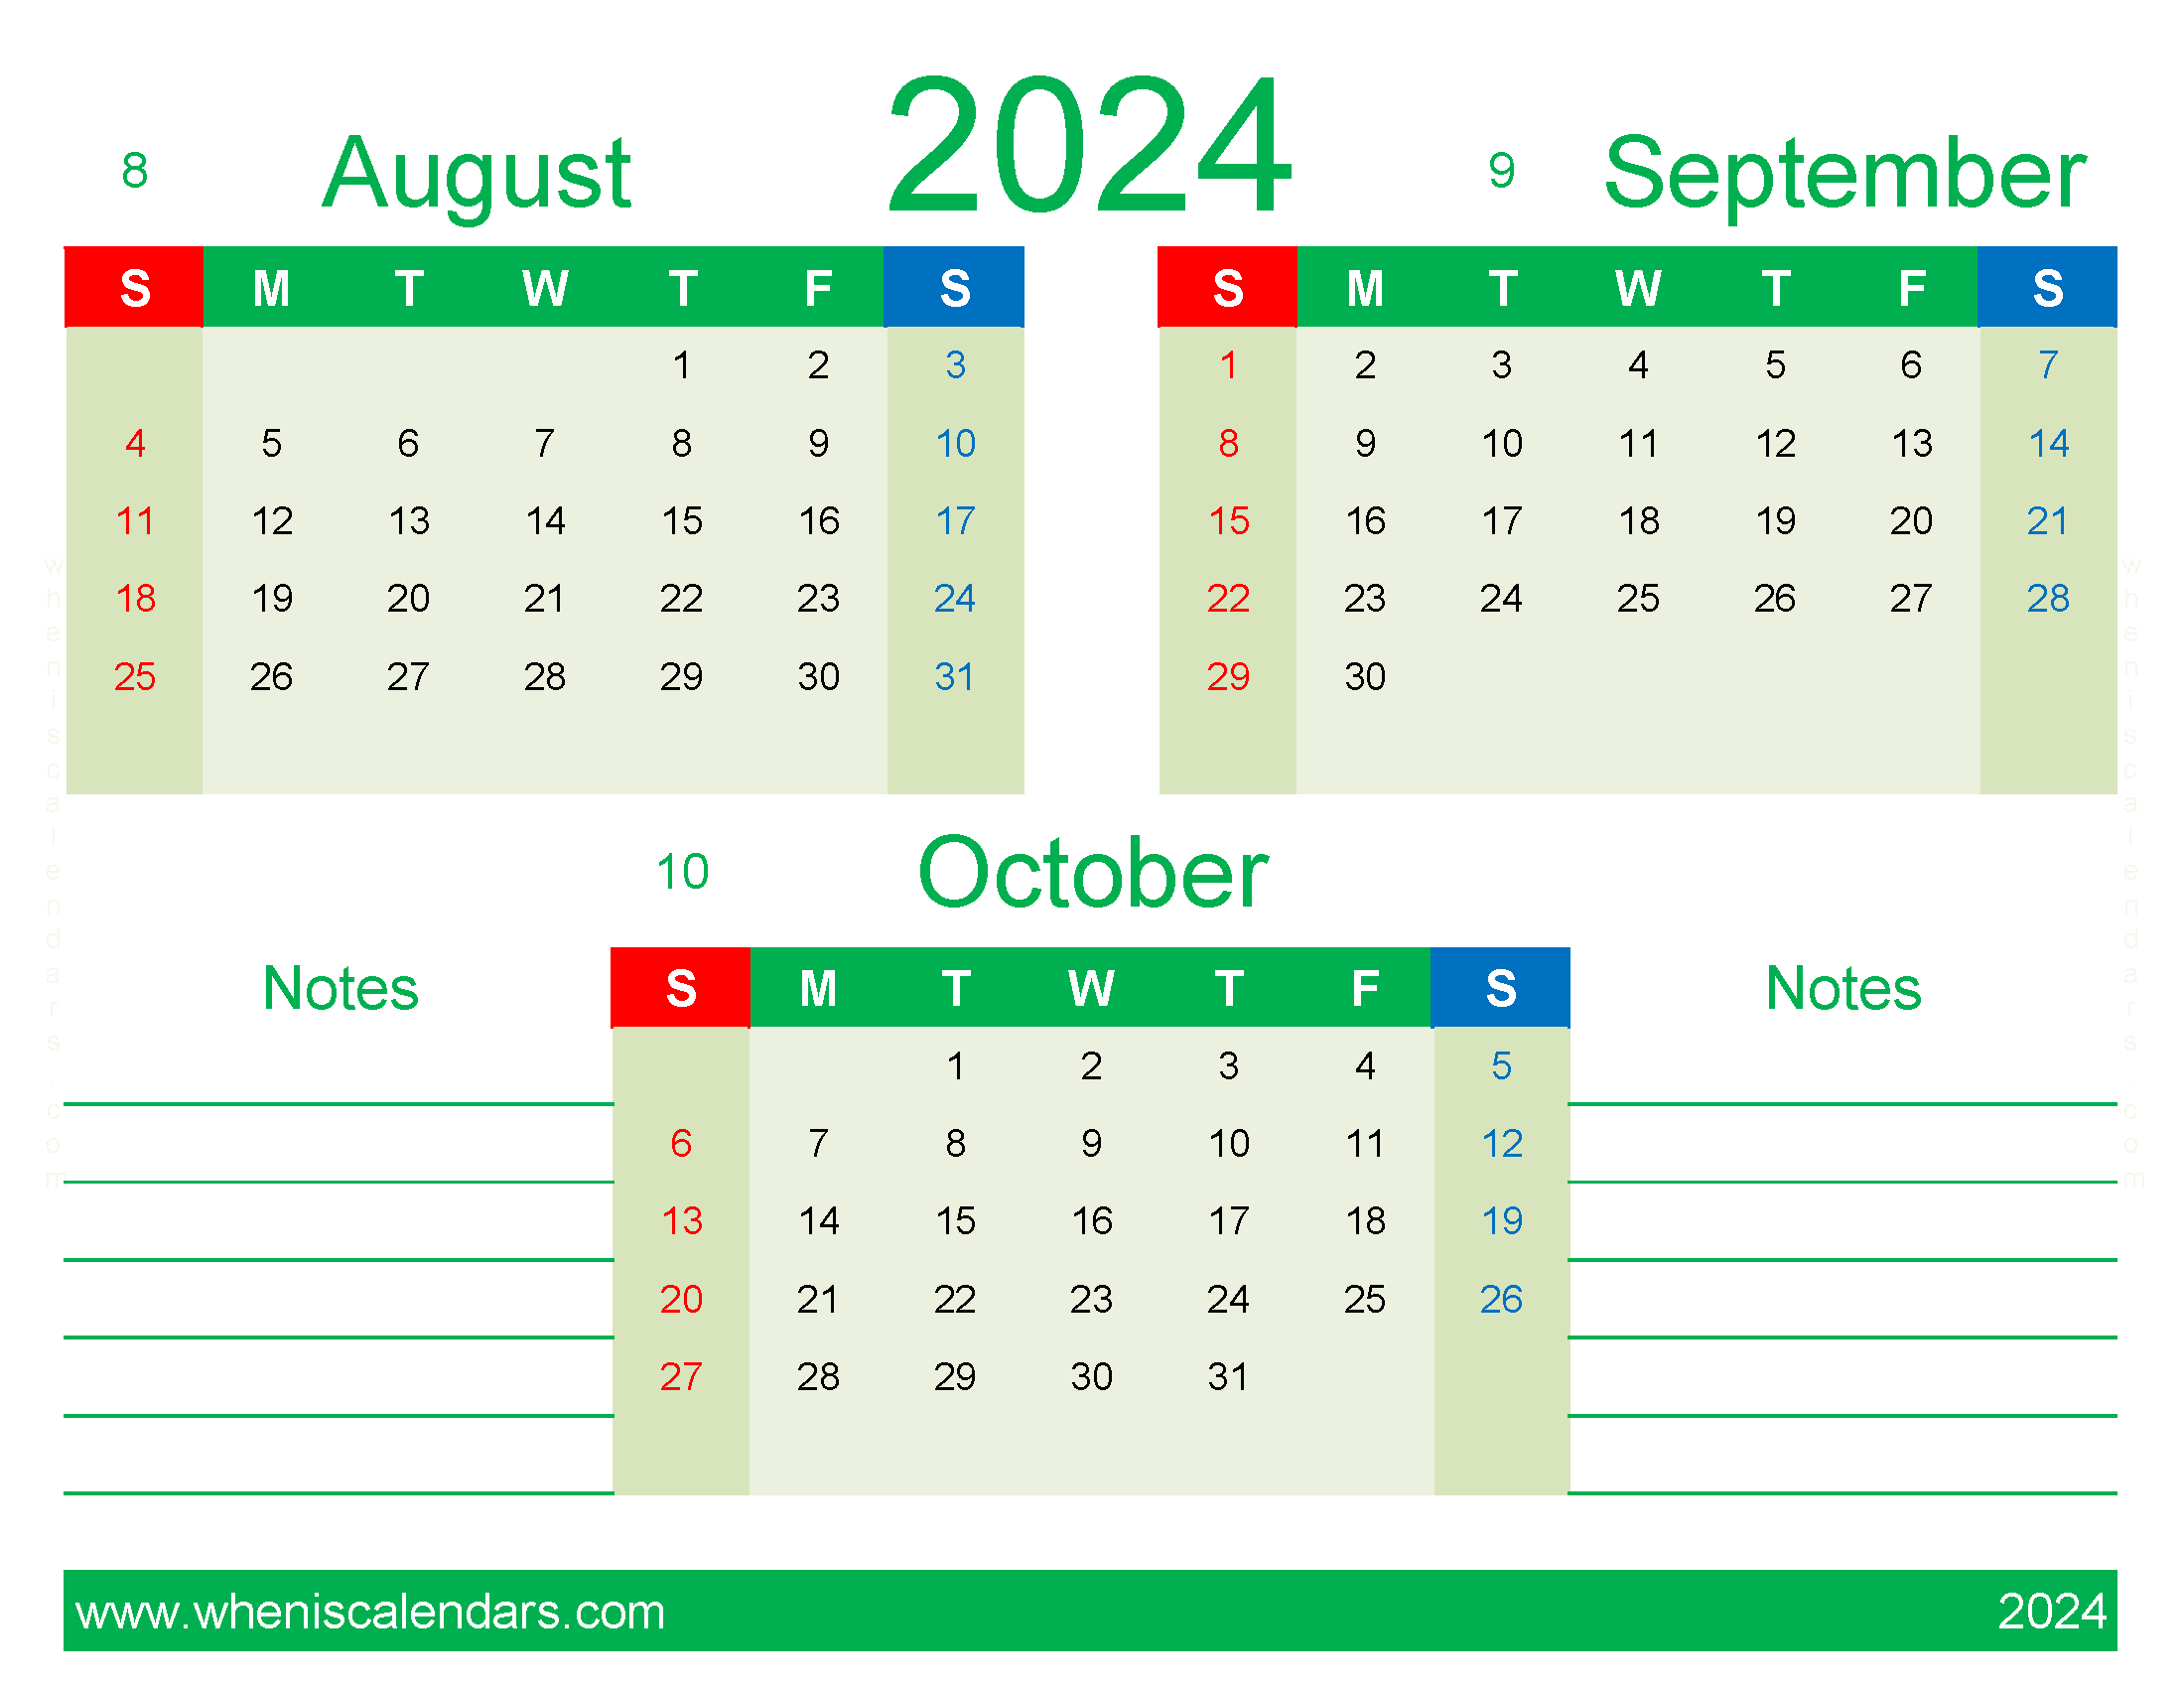 Download Aug Sept and October 2024 Calendar ASO432